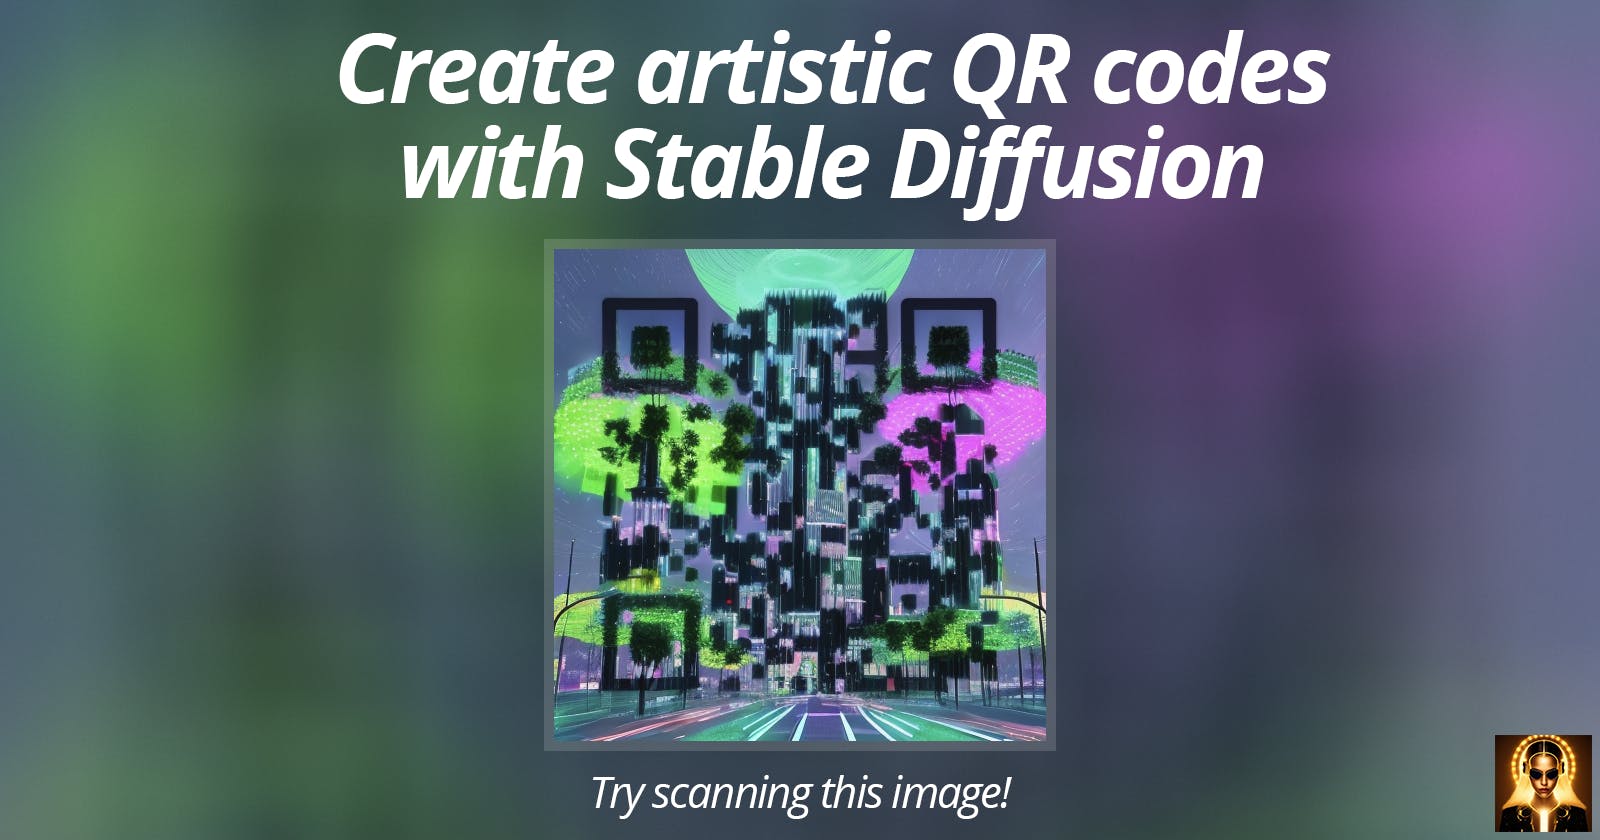 How to create artistic QR codes with Stable Diffusion